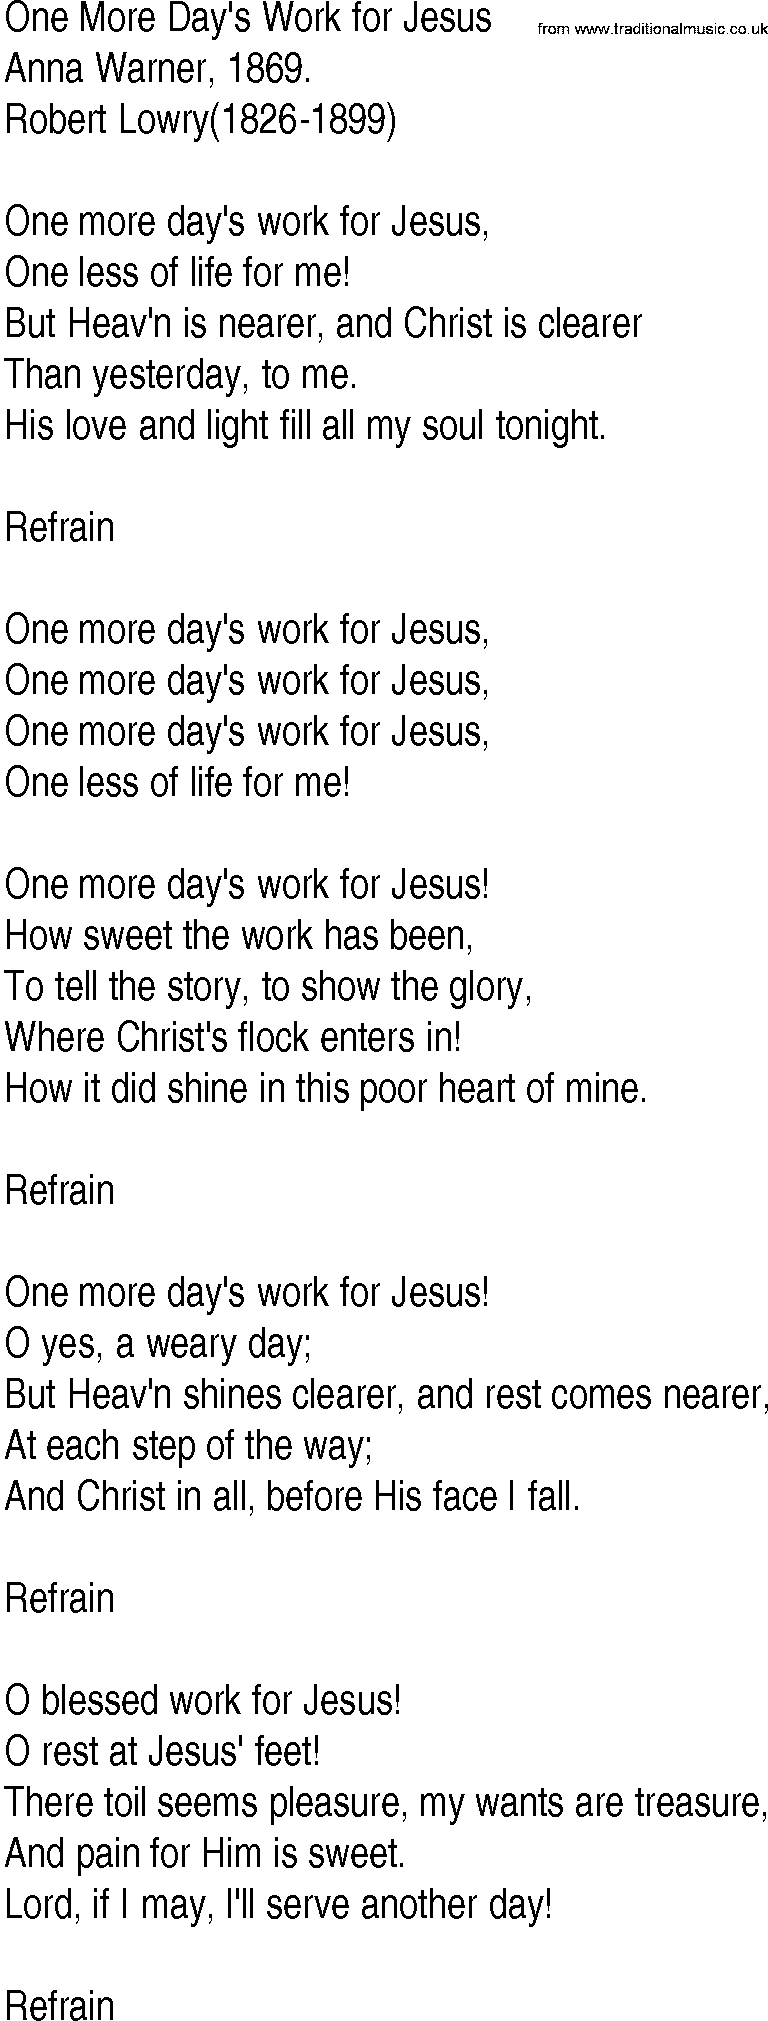 Hymn and Gospel Song: One More Day's Work for Jesus by Anna Warner lyrics